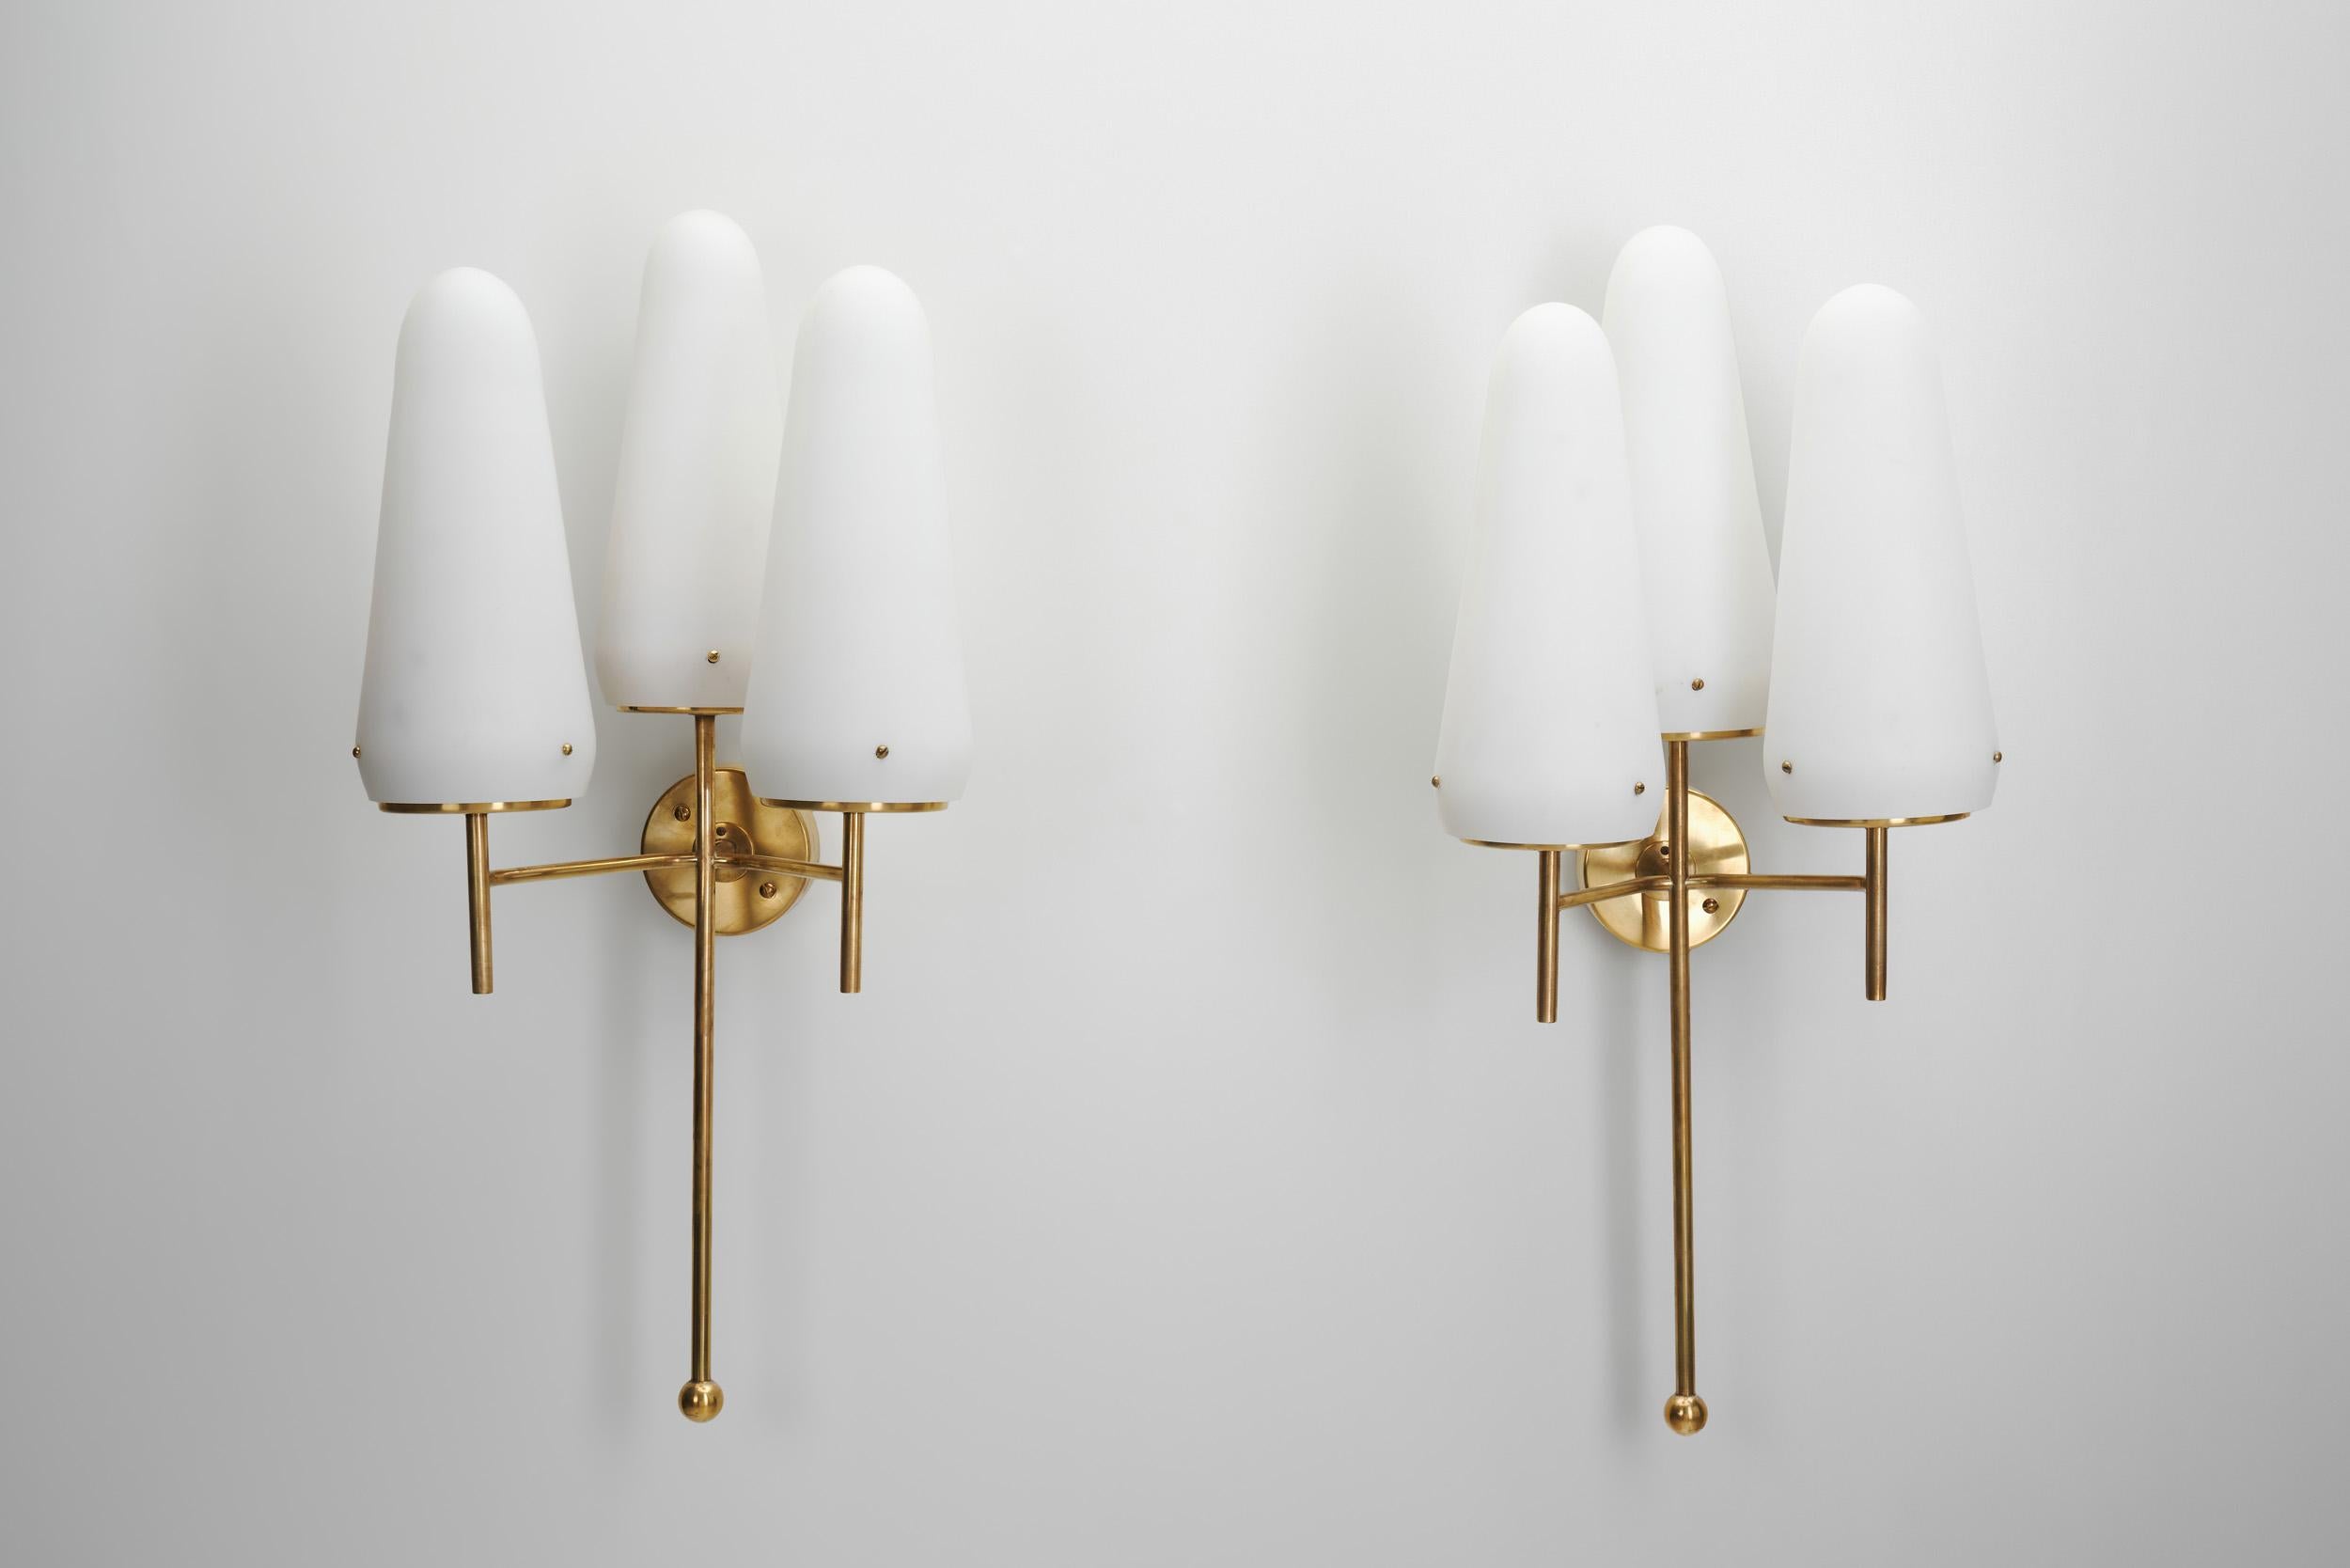 Hans Agne Jakobsson Brass and Glass Wall Sconces for AB Markaryd, Sweden 1950s For Sale 3